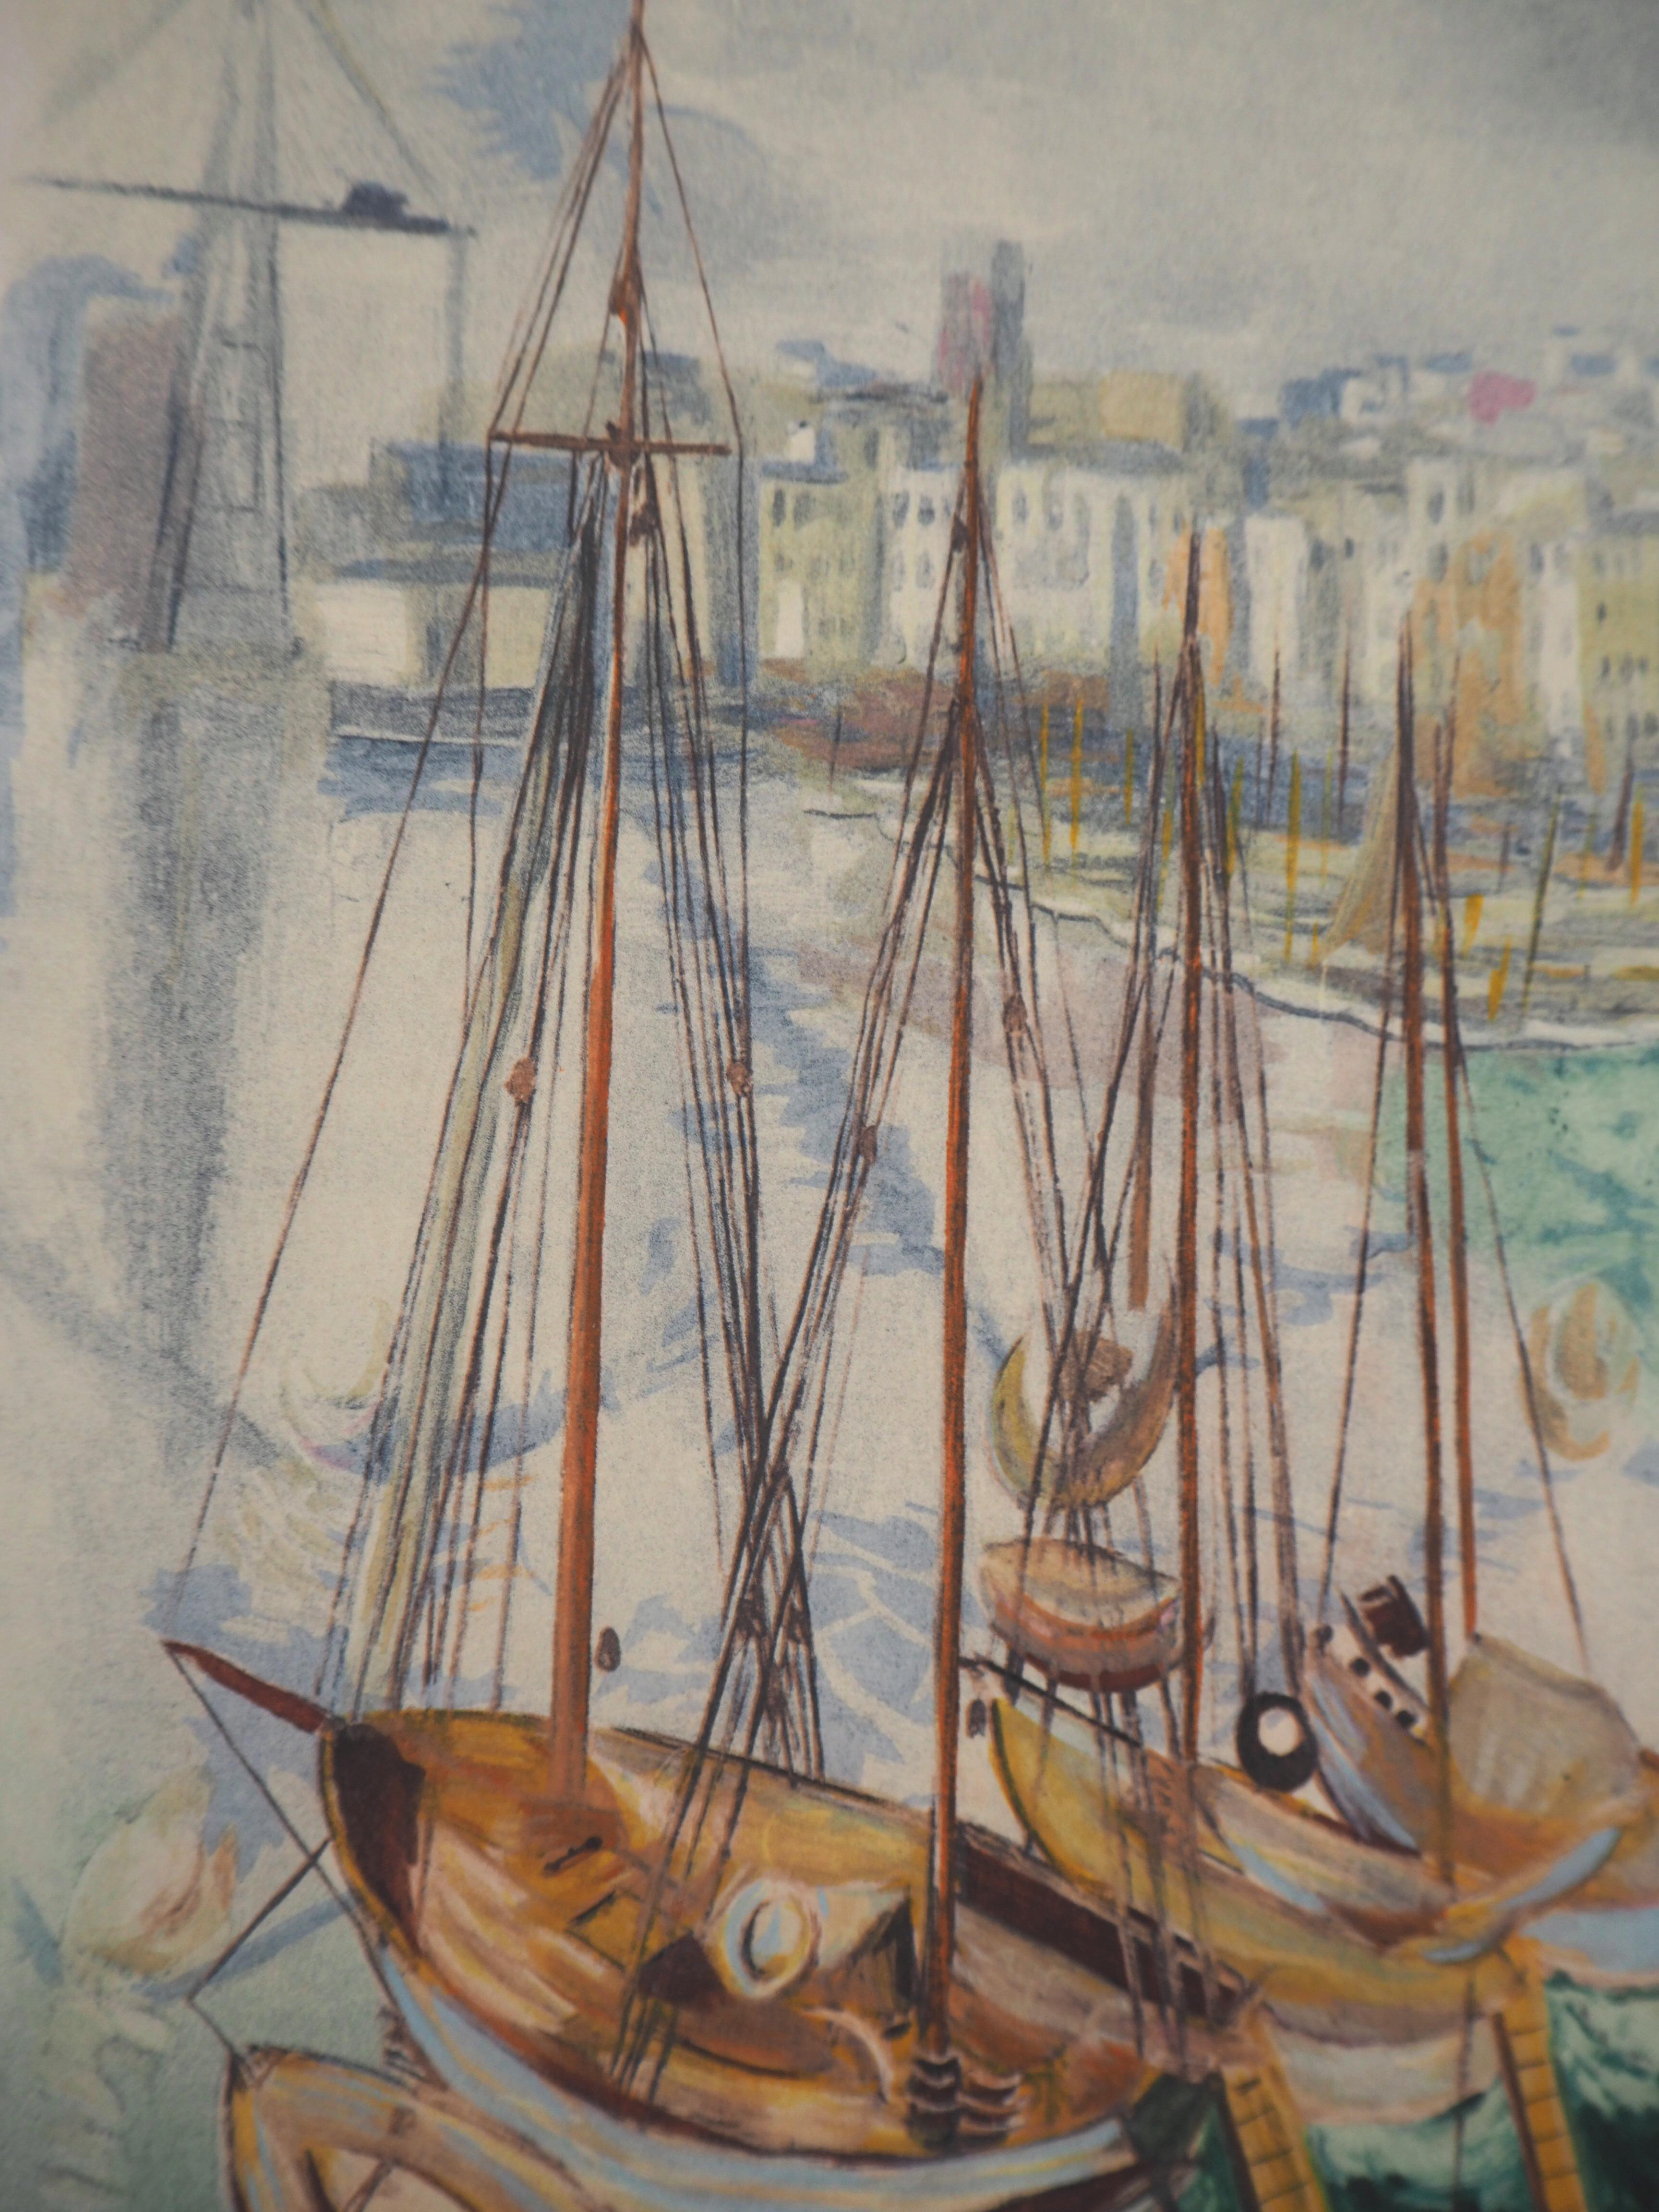 Moise KISLING
Sailing Boats in French Harbour

Original Lithograph
Printed signature in the plate
On Arches vellum
38 x 28 cm (c. 15 x 11 inches)

Excellent condition